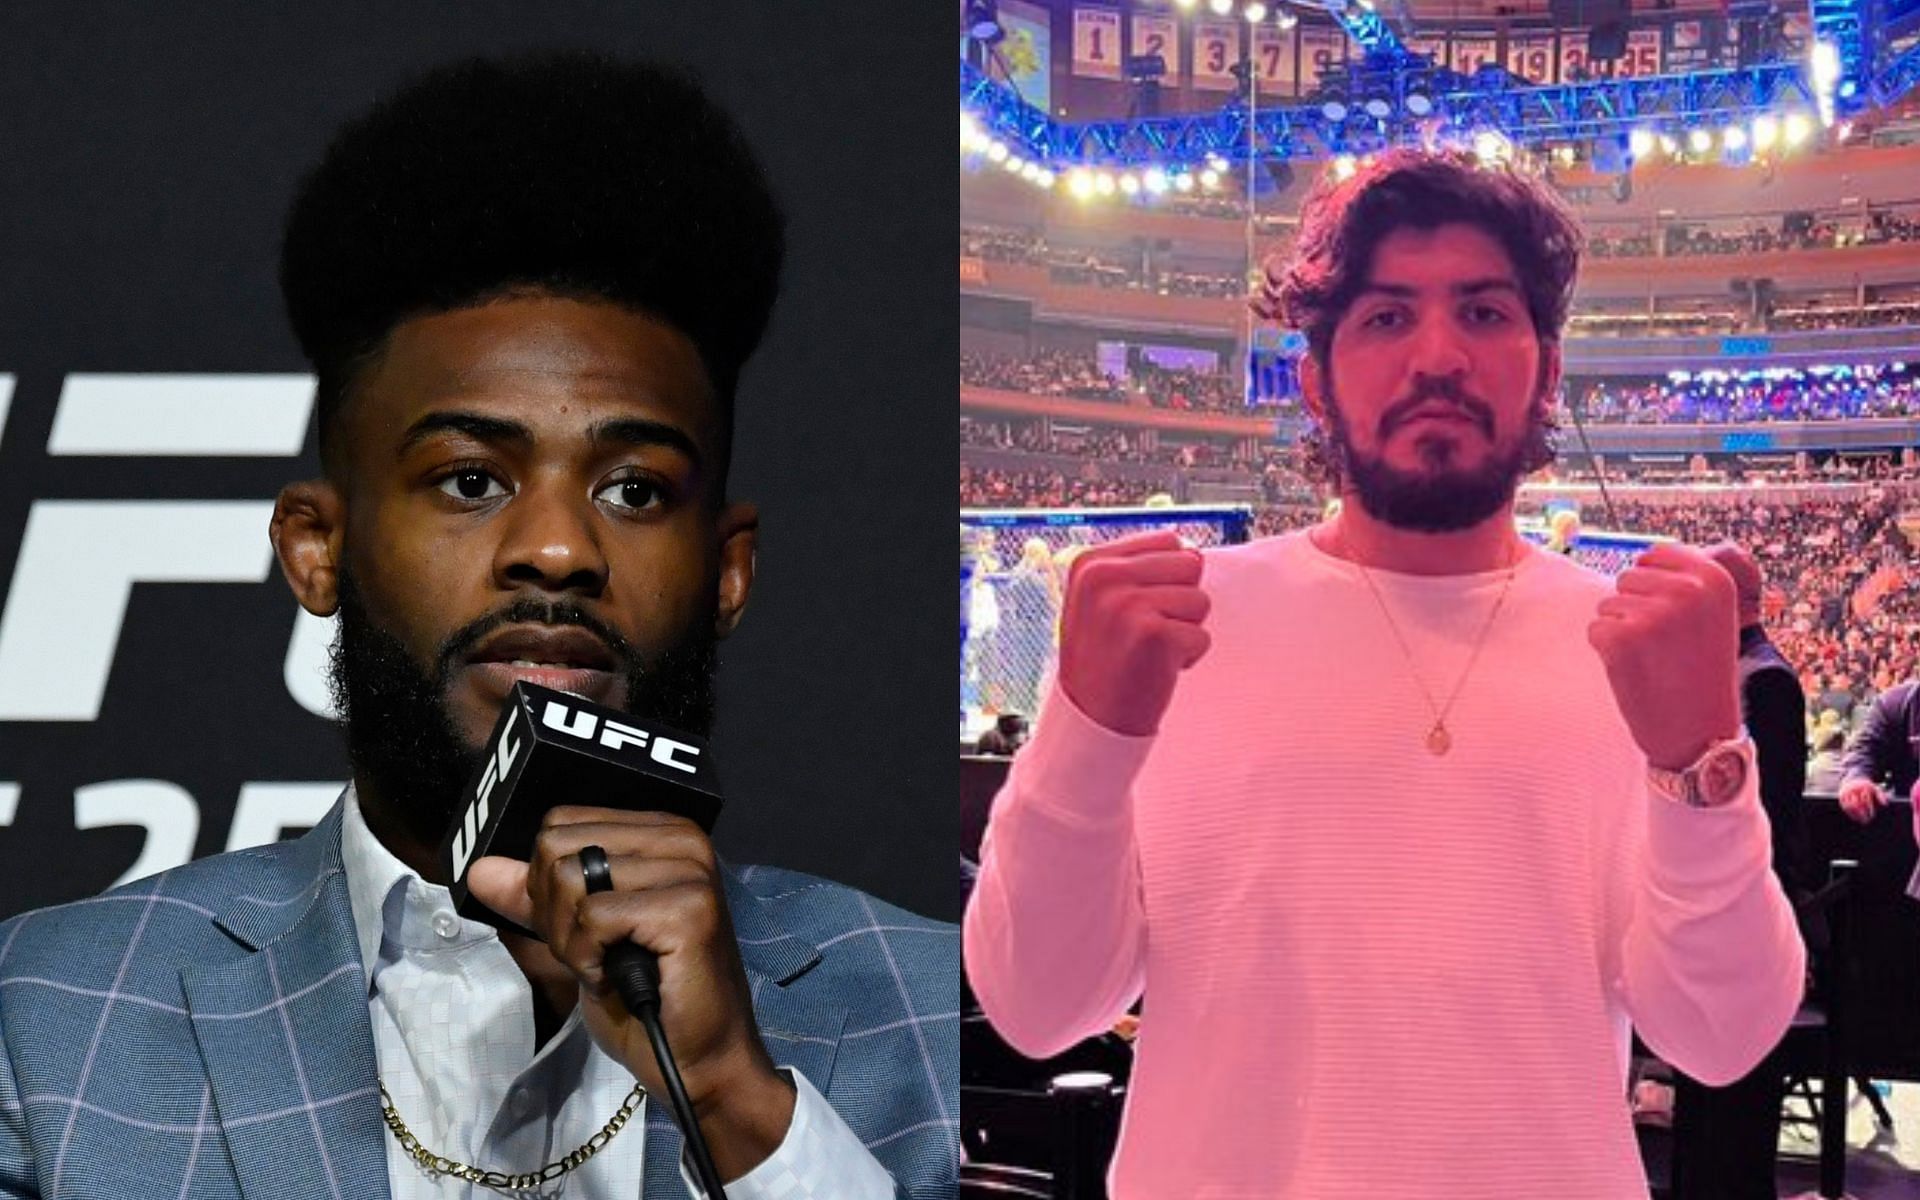 Aljamain Sterling (left) and Dillon Danis (right) (Image credits Getty Images and @dillondanis on Twitter)